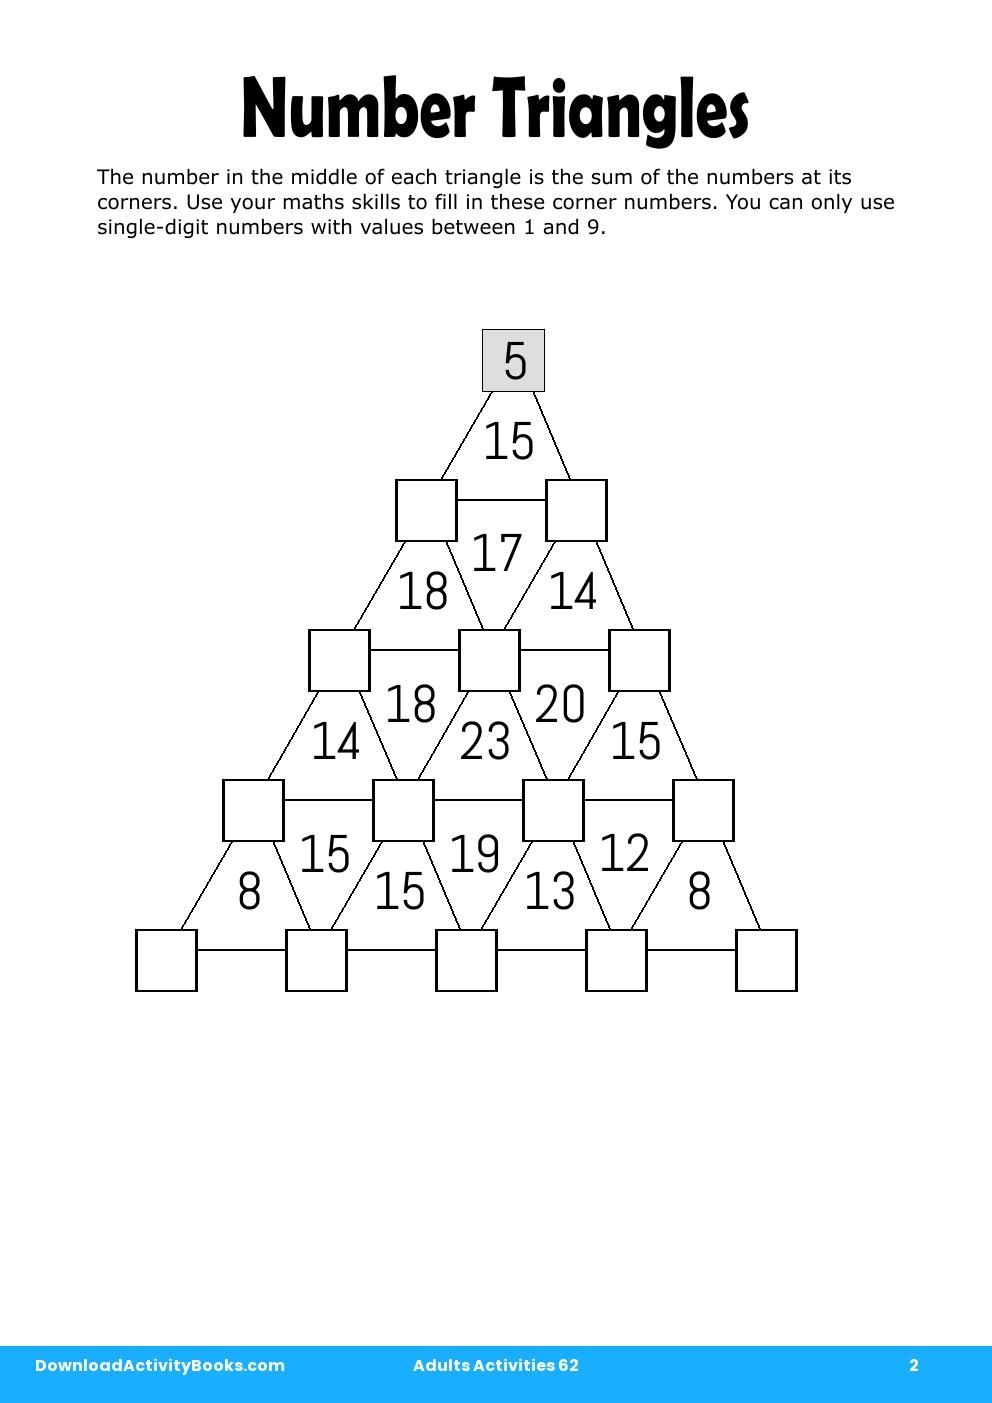 Number Triangles in Adults Activities 62